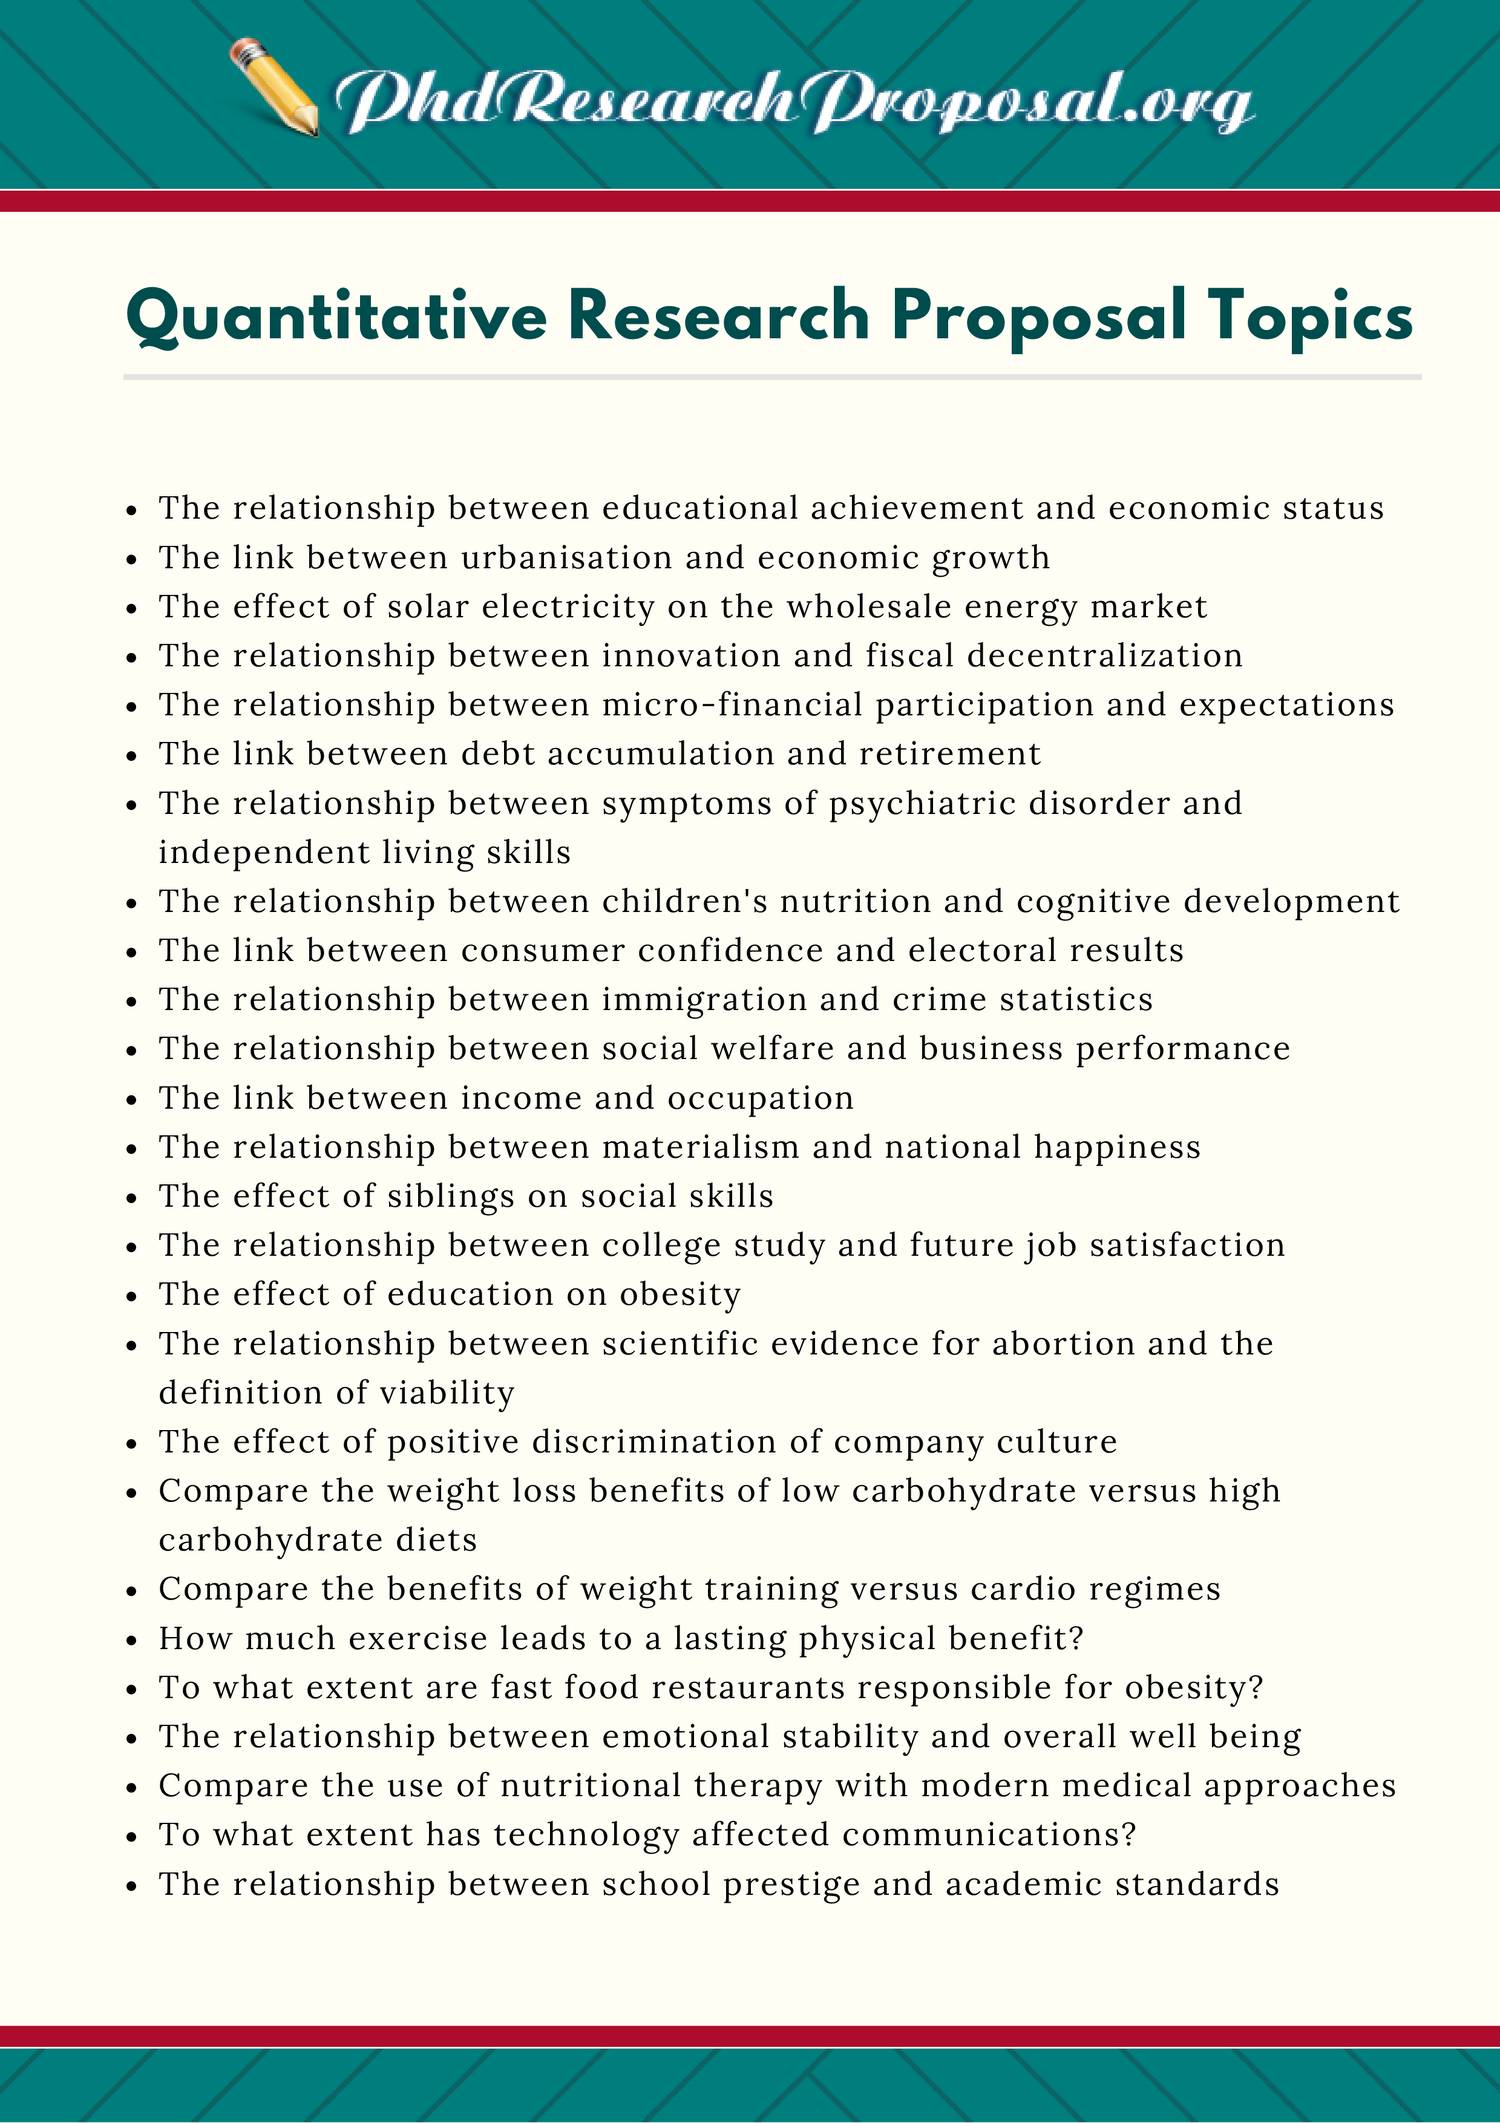 suitable topics for research proposal